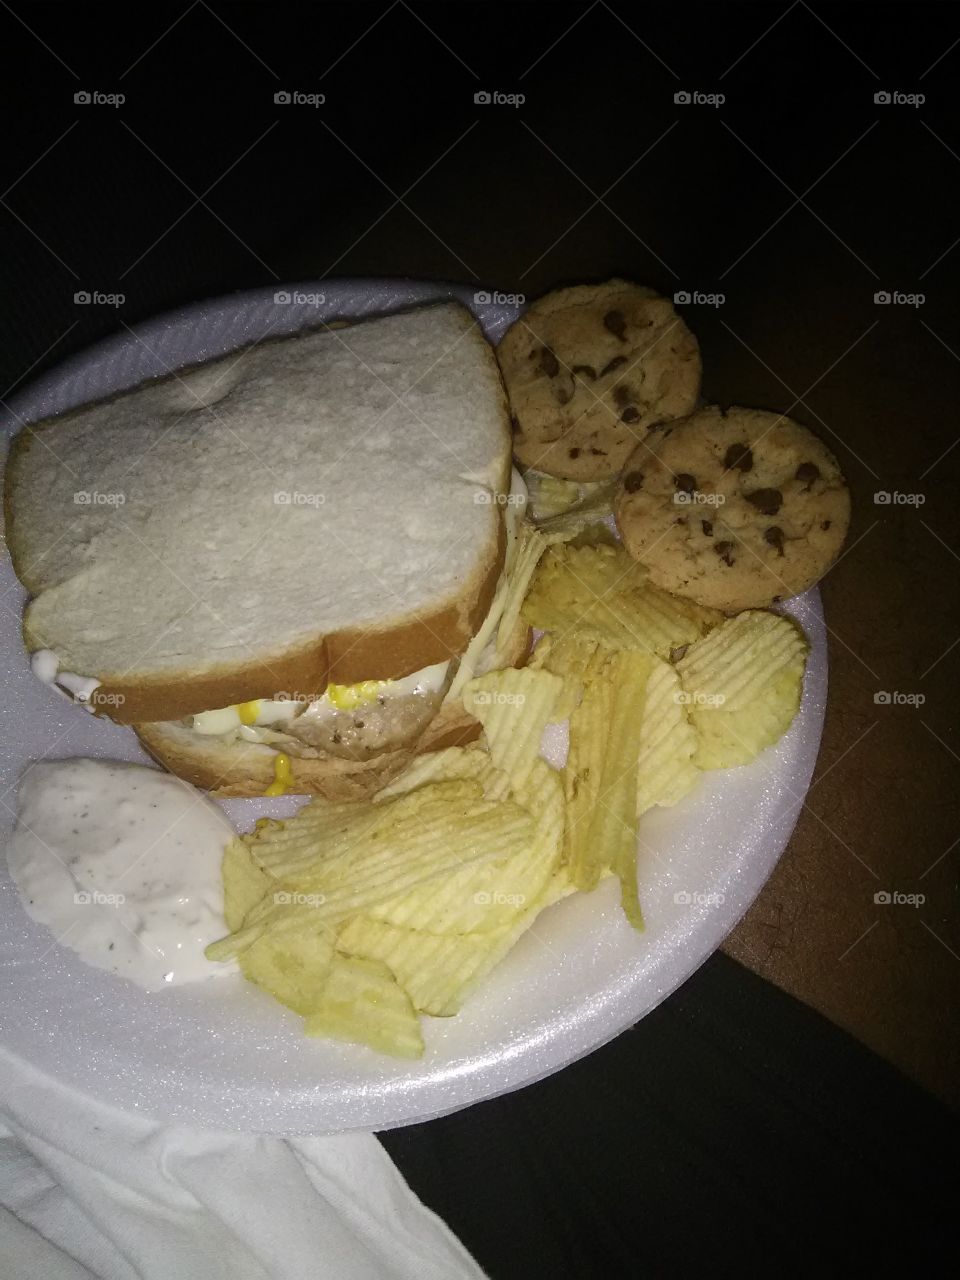 another Turkey burger on white bread with chips and chocolate chip cookies